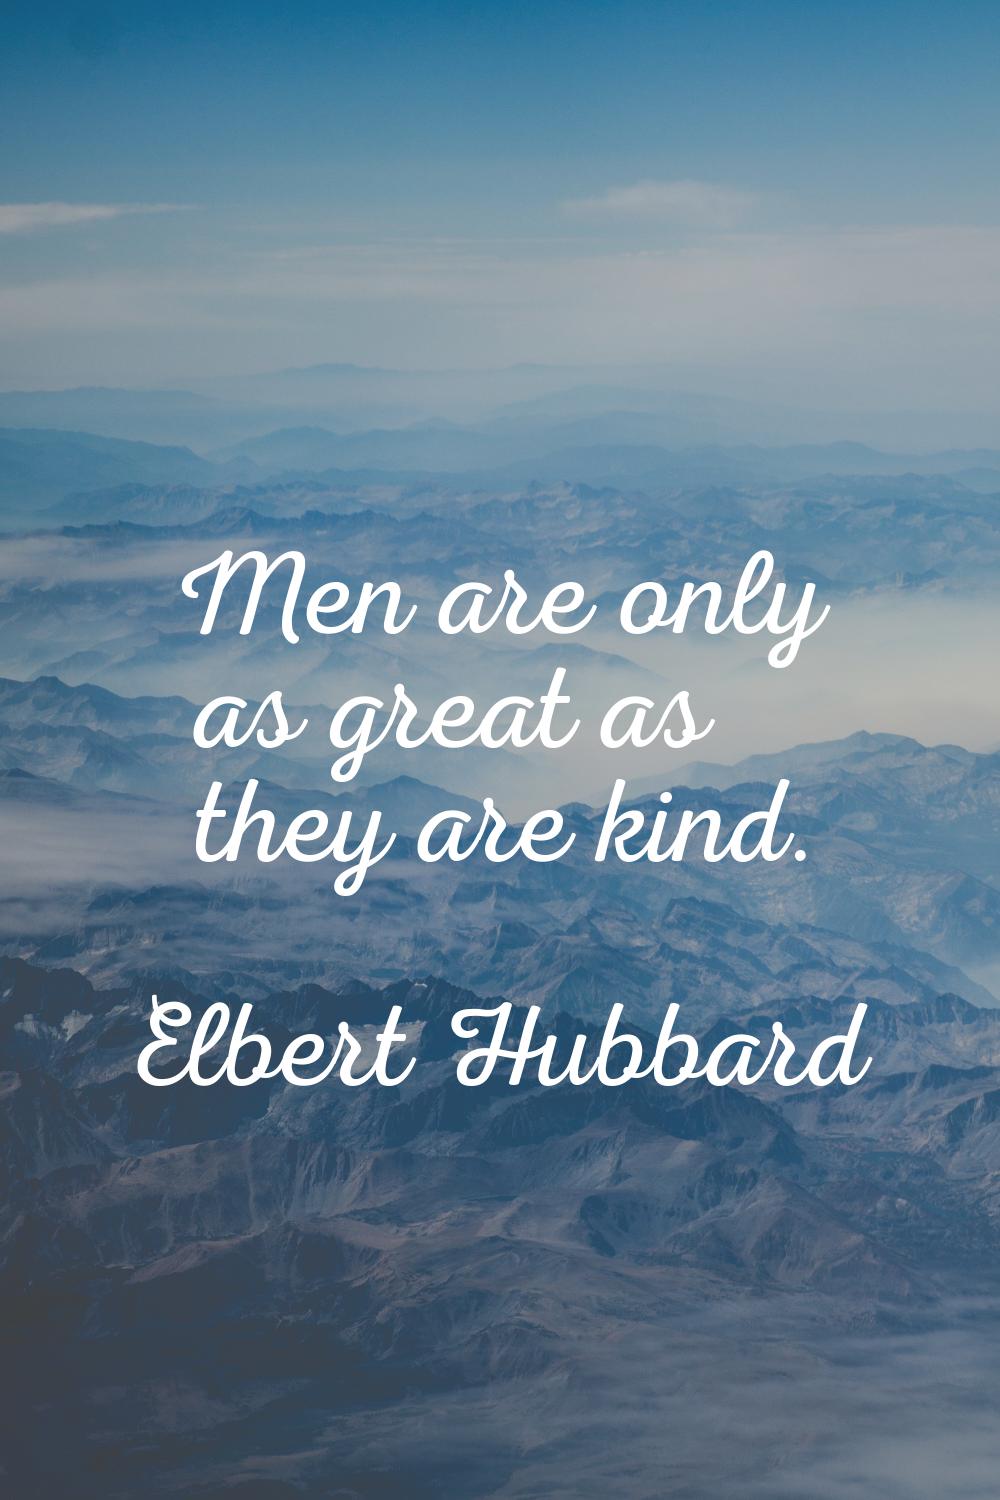 Men are only as great as they are kind.